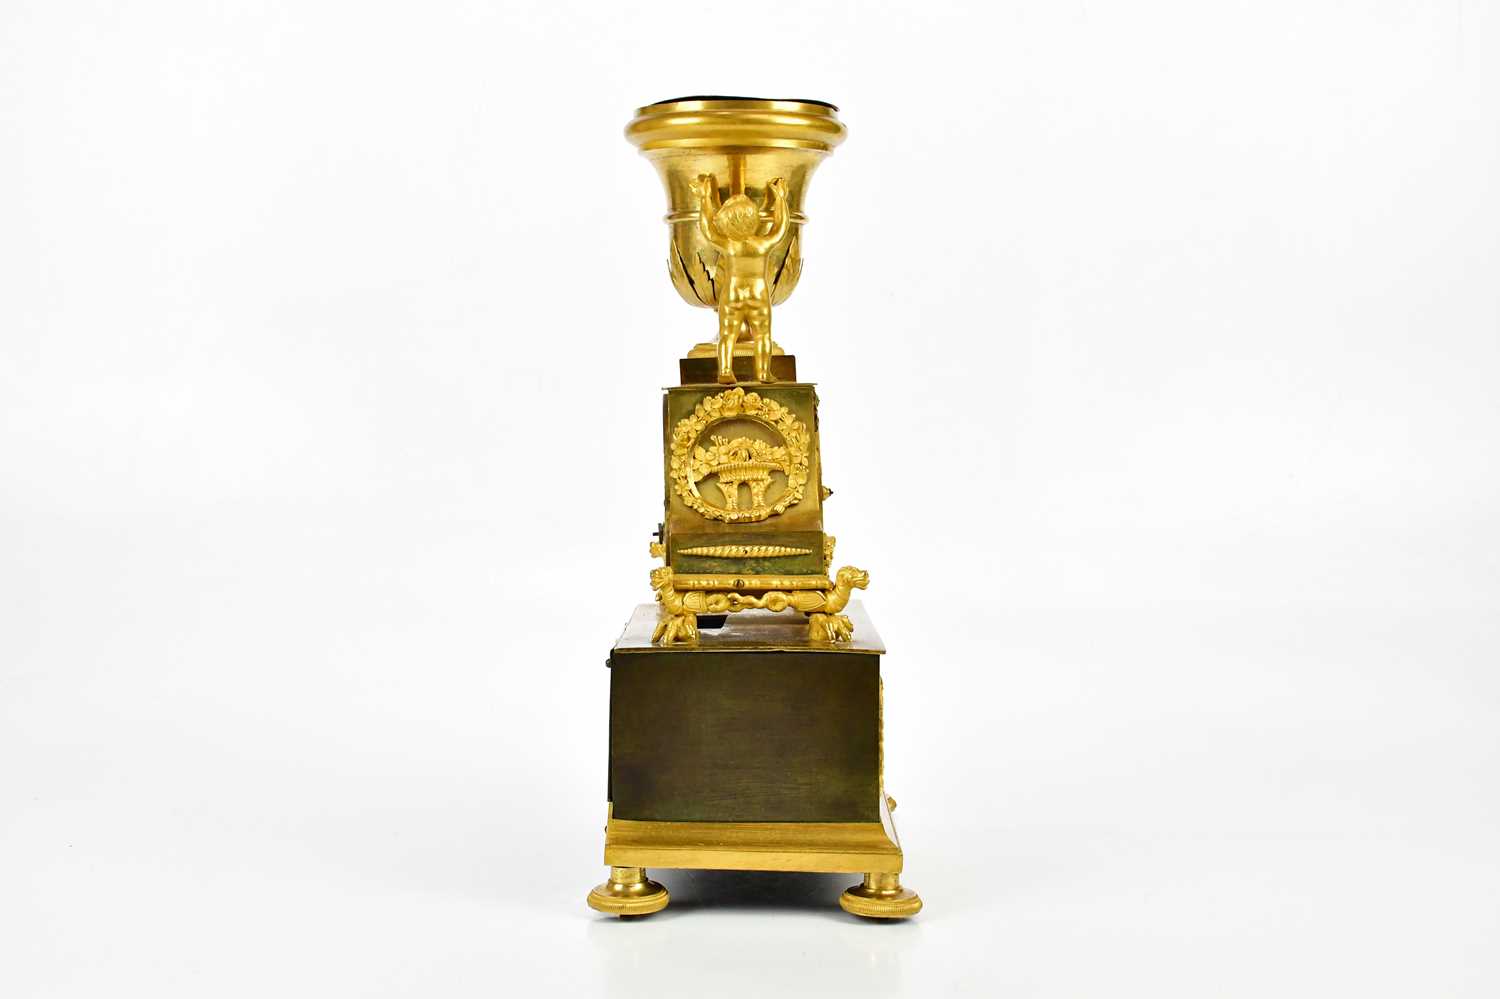 A late 19th century French ormolu mantel clock with cherubs supporting an urn finial above the - Image 5 of 7